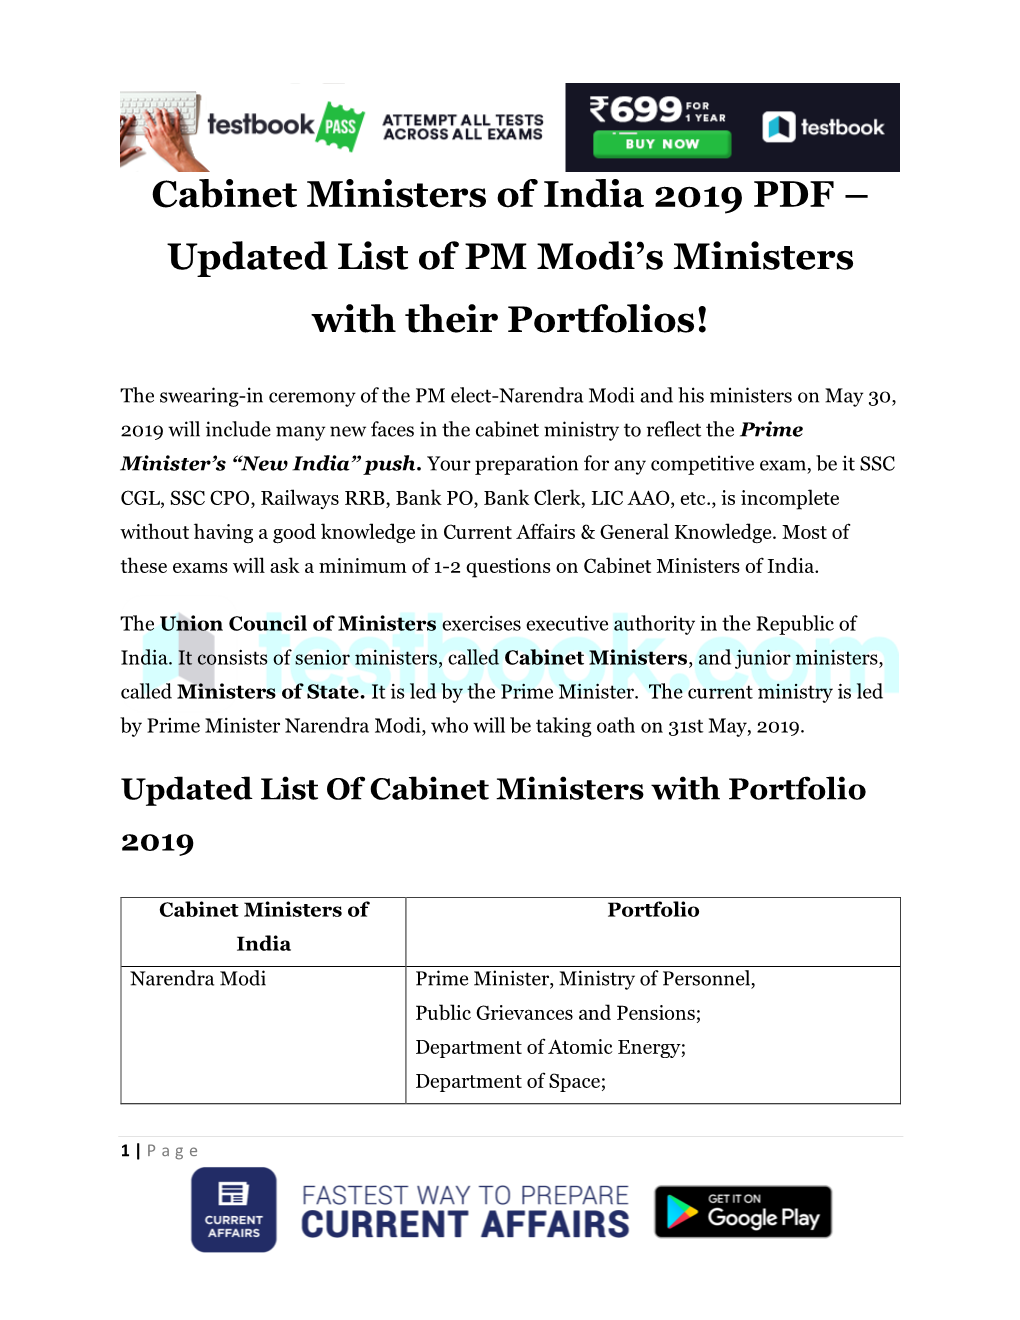 Cabinet Ministers of India 2019 PDF – Updated List of PM Modi’S Ministers with Their Portfolios!